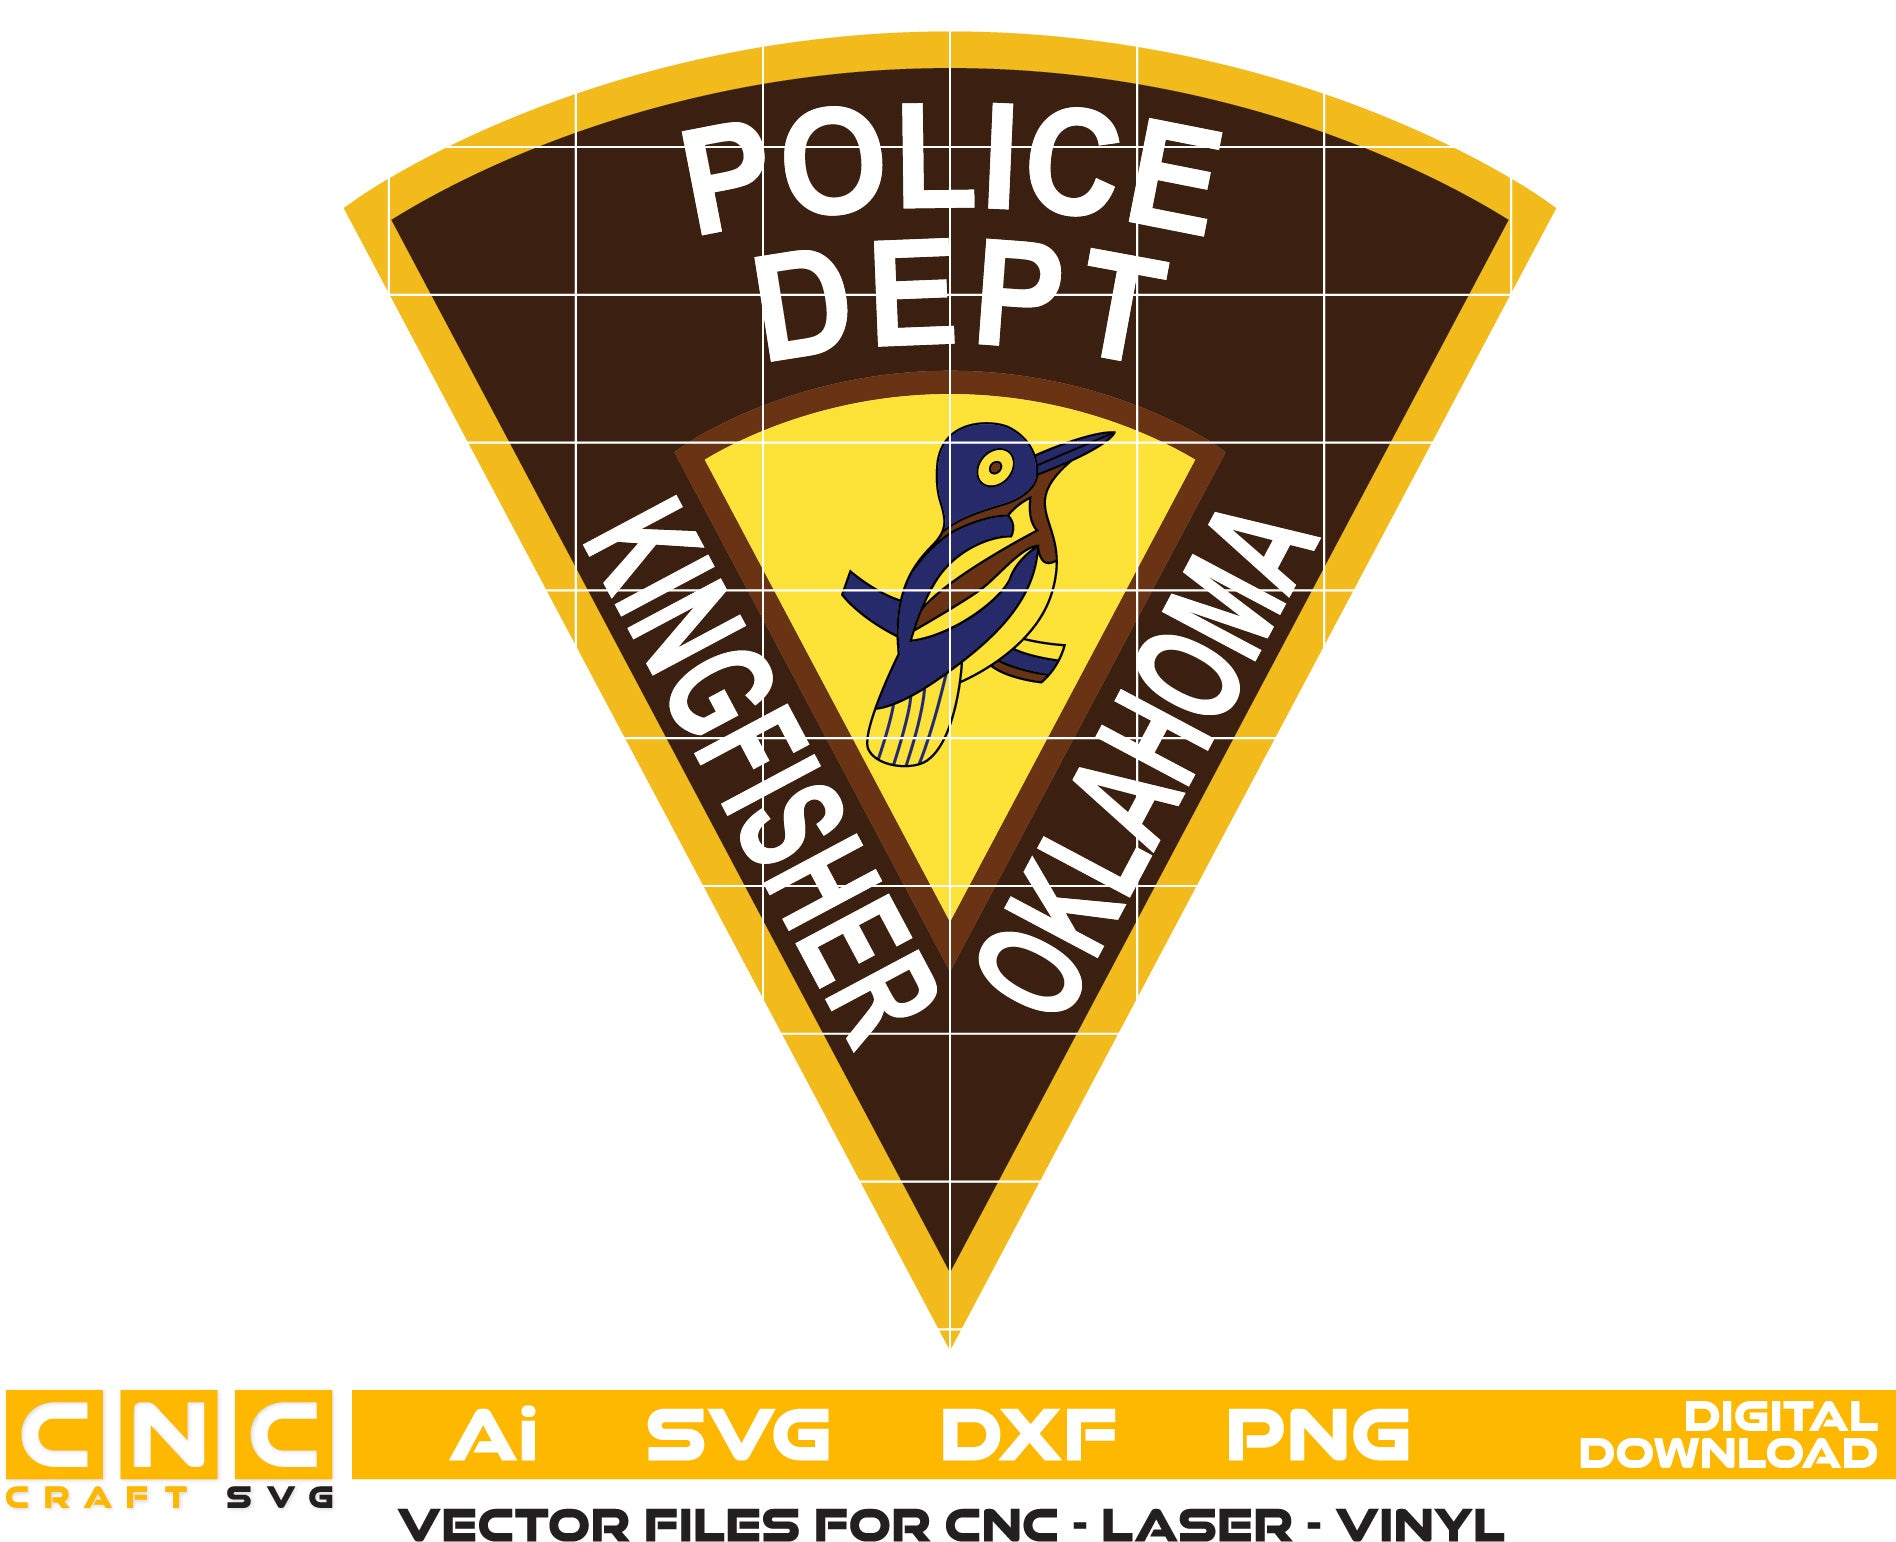 Oklahoma Kingfisher Police Badge vector file for Printing, Laser Engraving, Woodworking, CNC Router, Cricut, Ezecad etc.